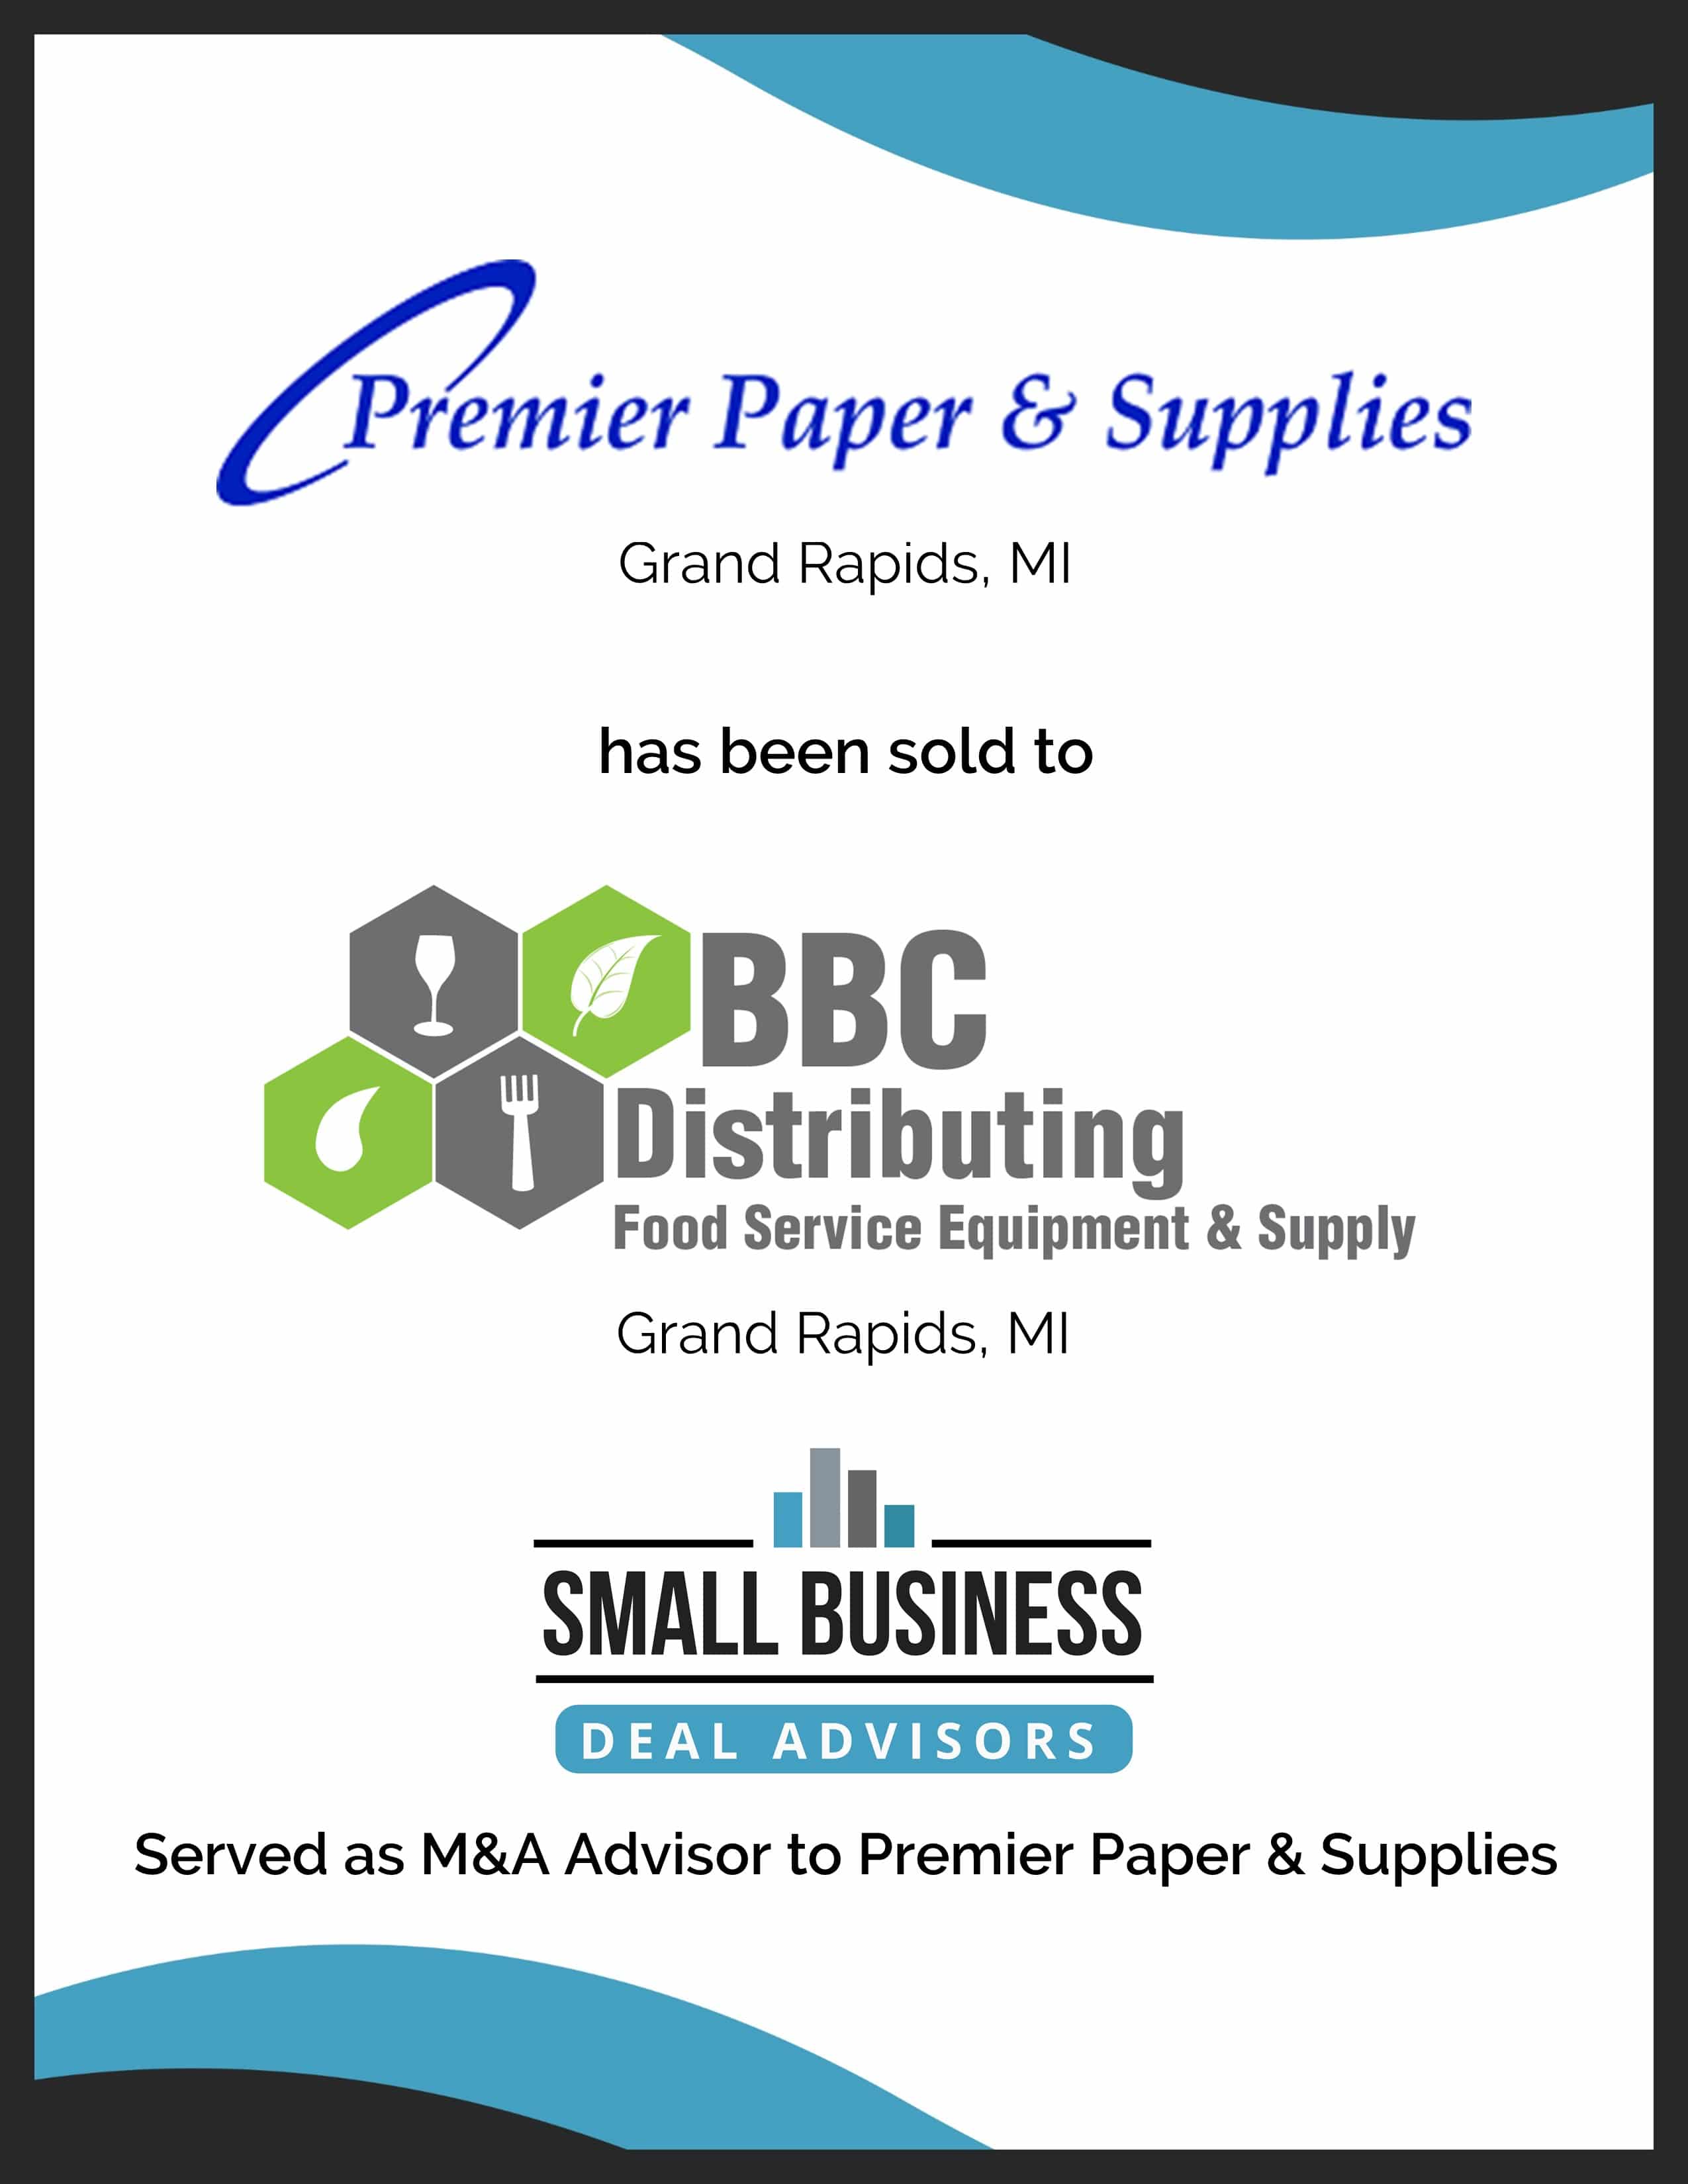 Premier Paper & Supplies has been sold to BBC Distributing